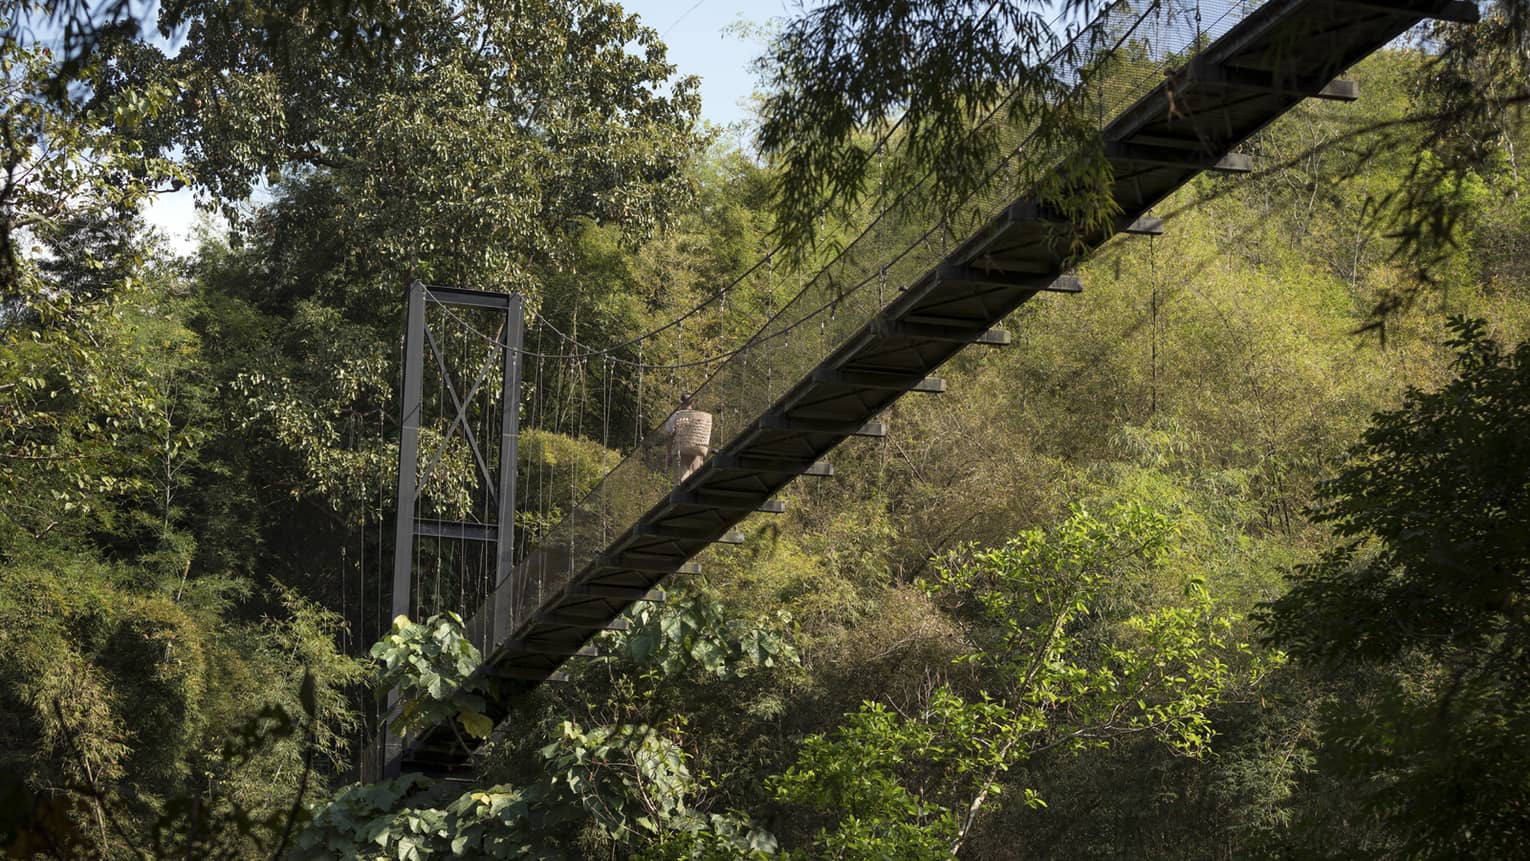 A suspension bridge crosses a lush forest, high above the ground. A person with a basket walks along it, surrounded by dense greenery and sunlight filtering through the trees.